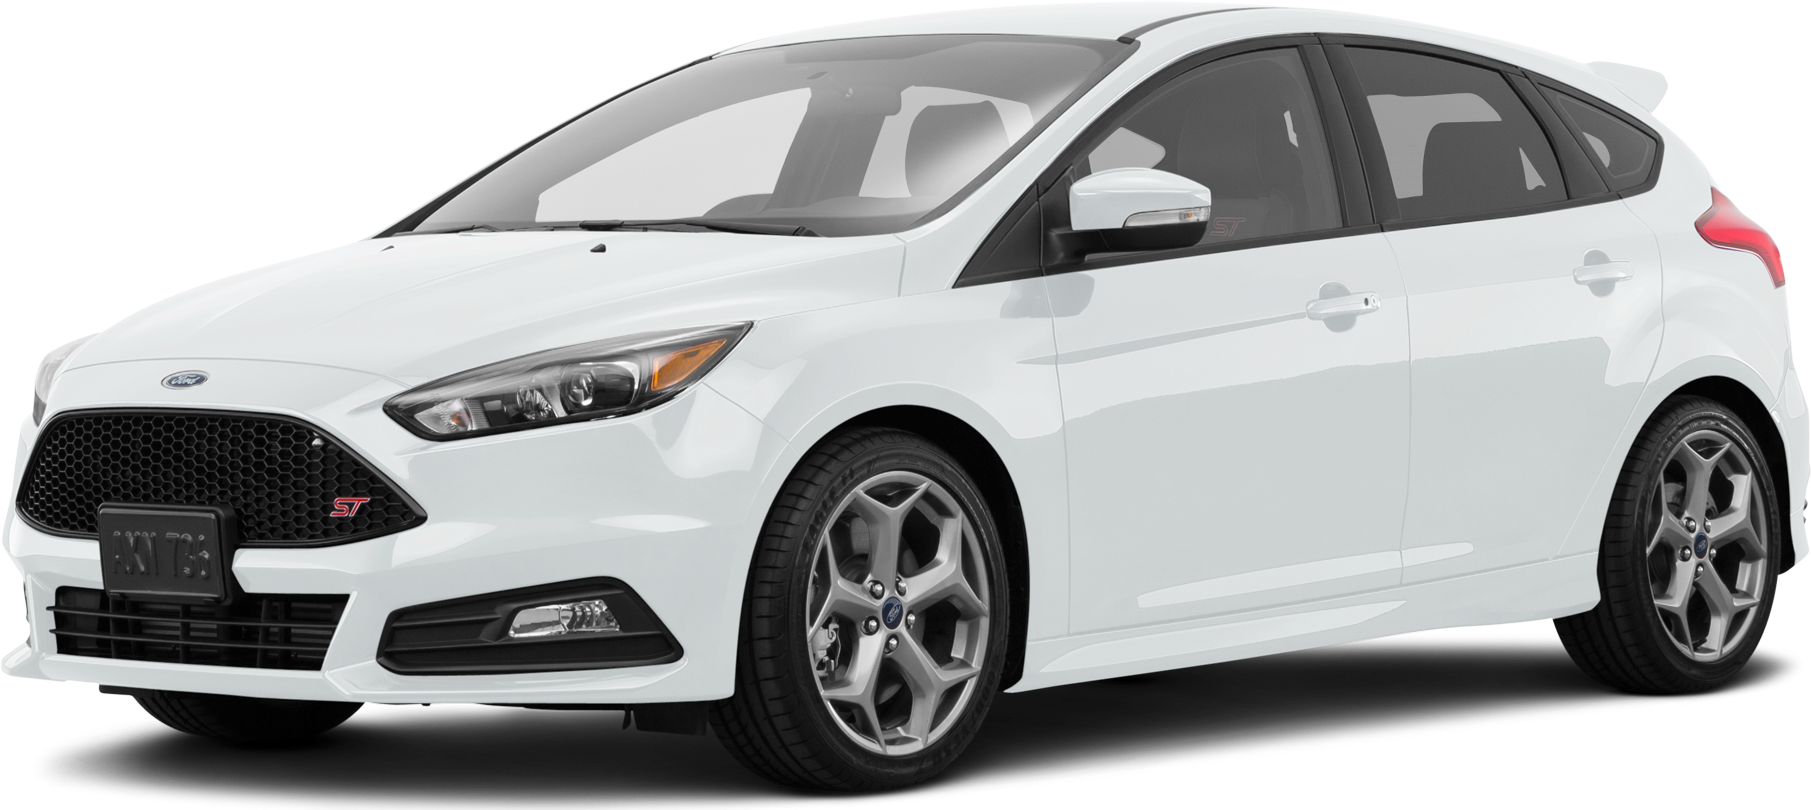 2013 Ford Focus Research, photos, specs, and expertise